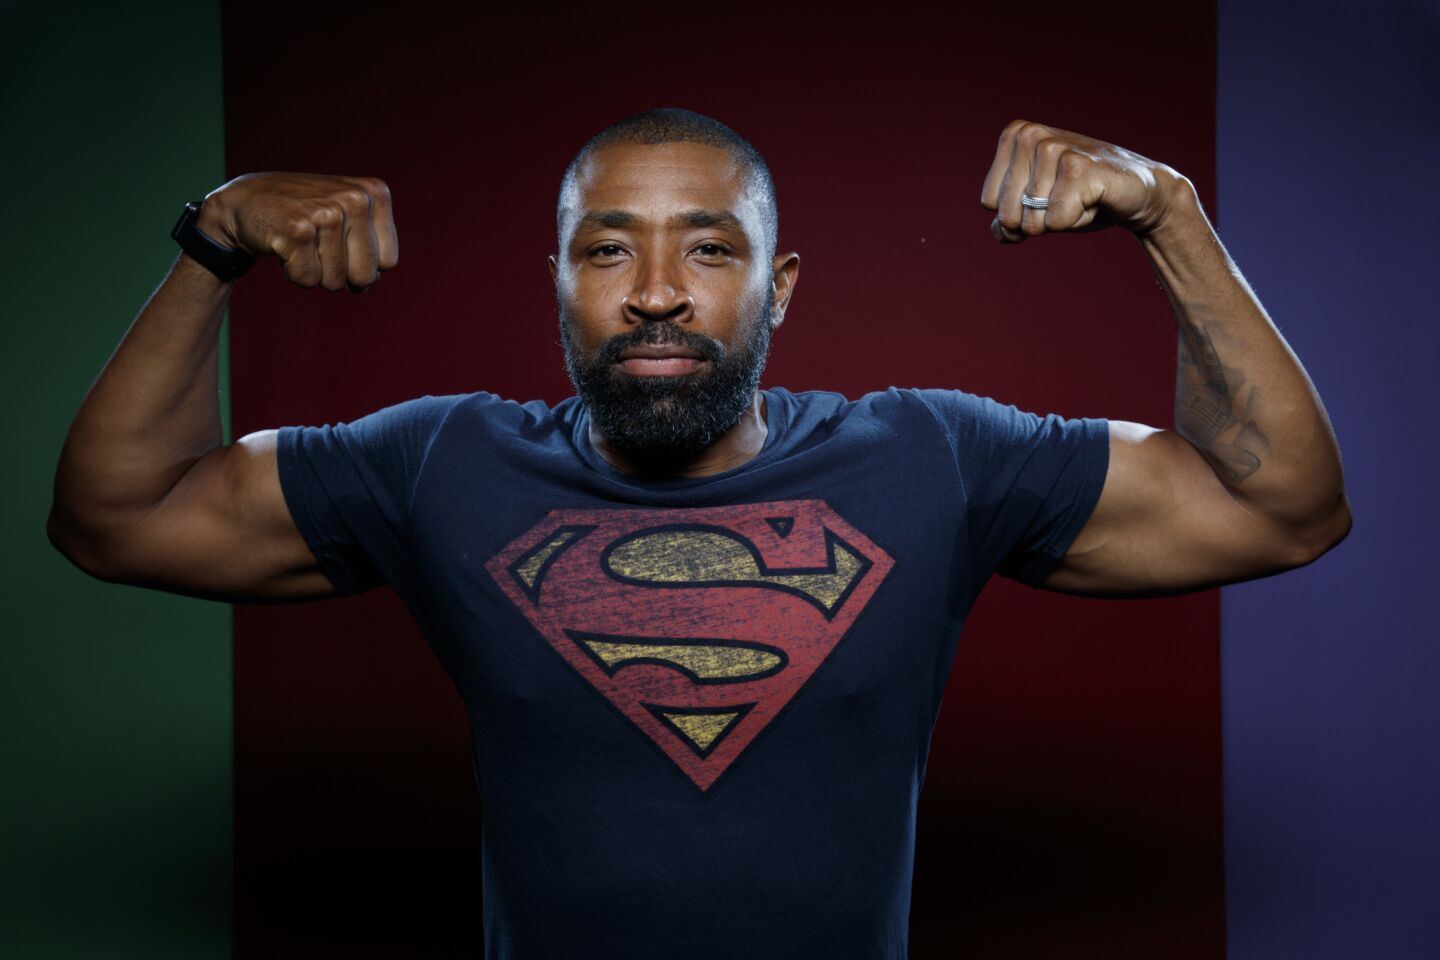 Cress Williams, who stars as the Black Lightning in the new TV series "Black Lightning," was at the L.A. Times photo studio at Comic-Con 2017.